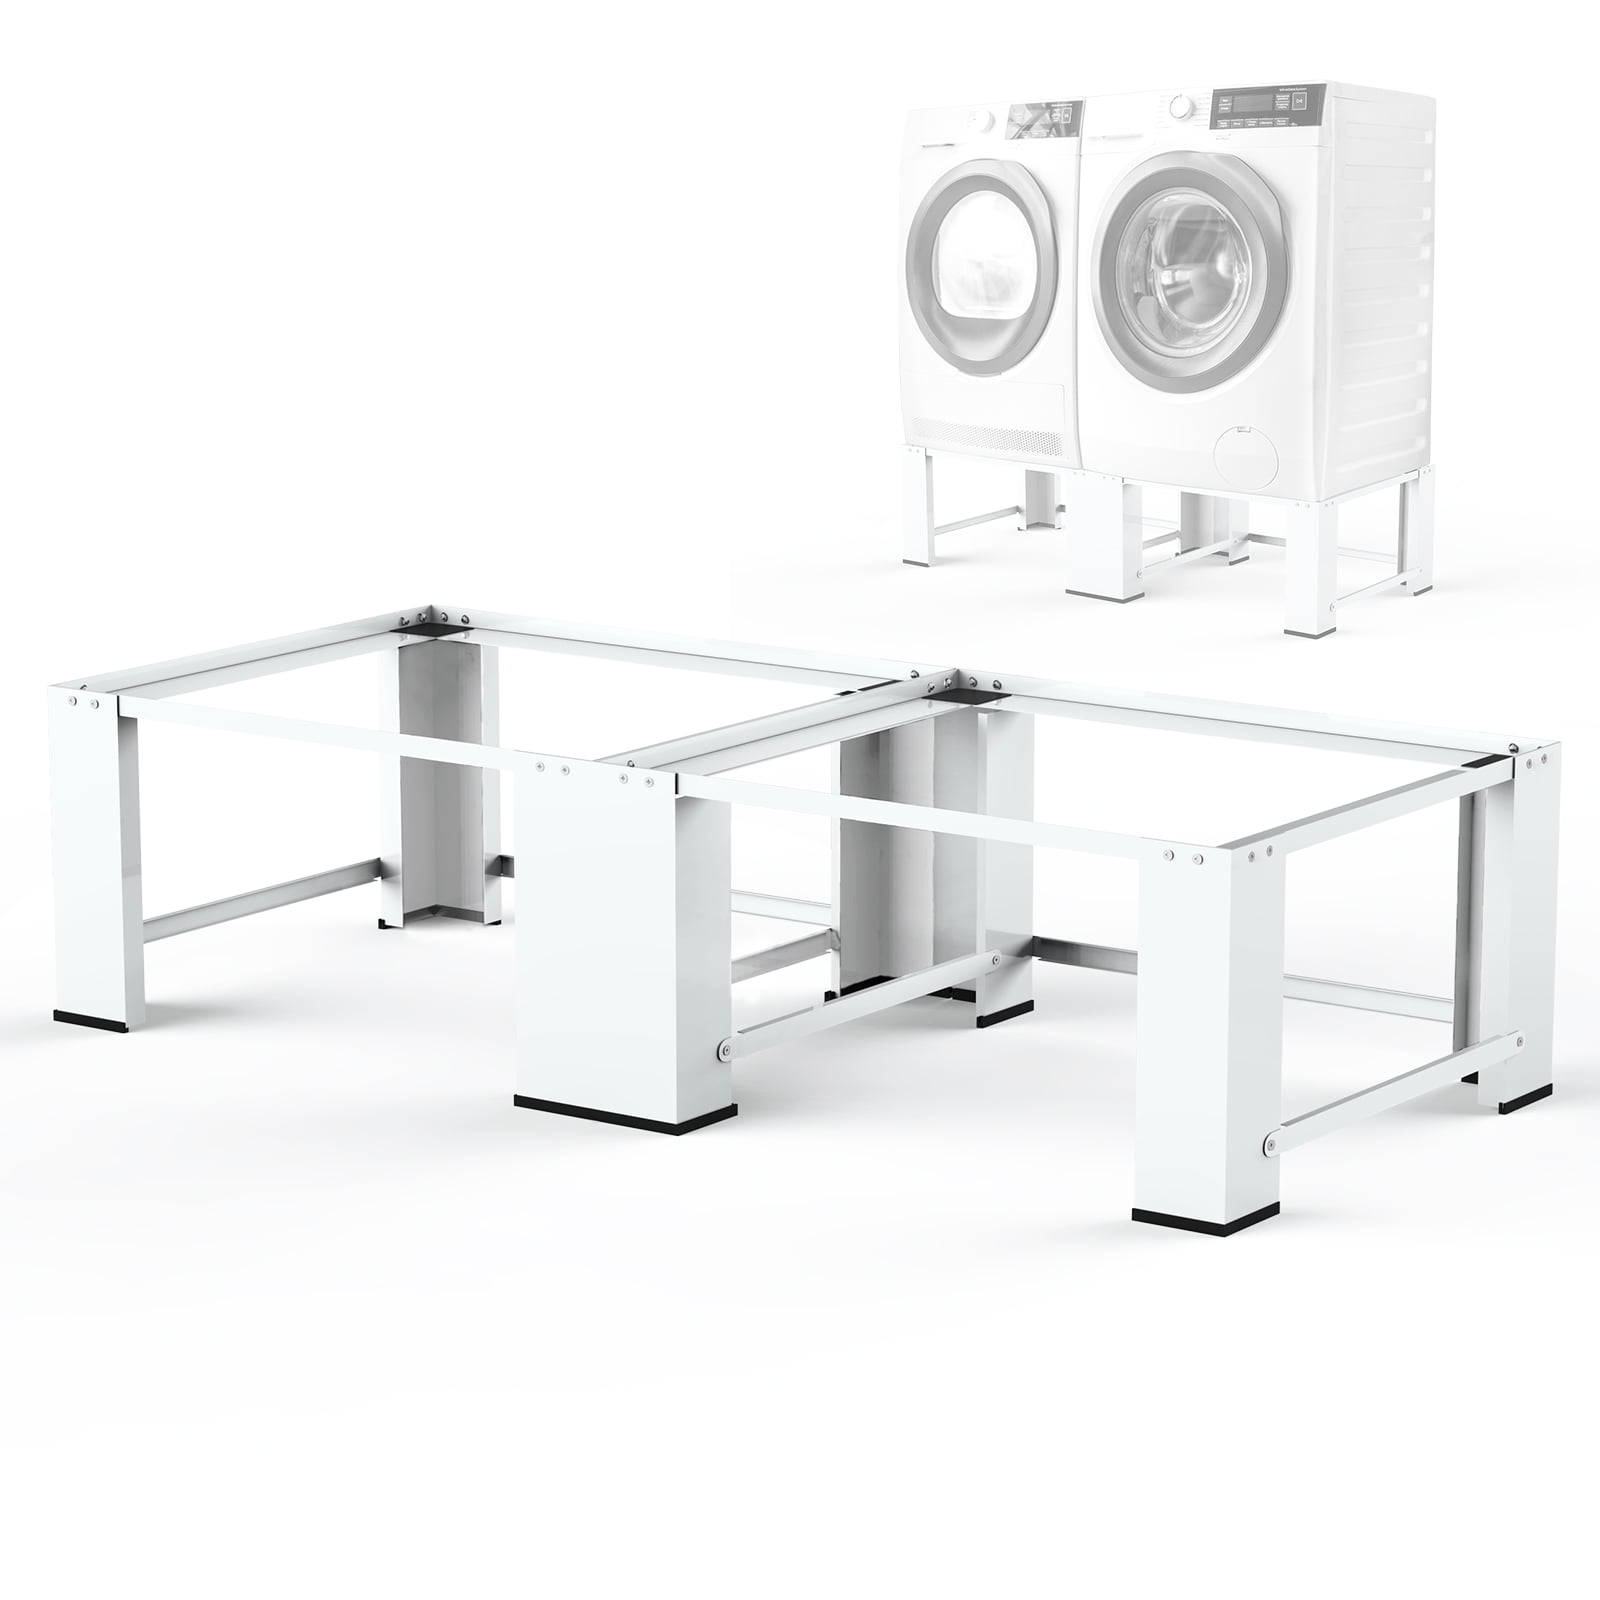 BLACK+DECKER Washer Dryer Stand BWDS - The Home Depot  Washer and dryer  stand, Small washer and dryer, Portable washer and dryer